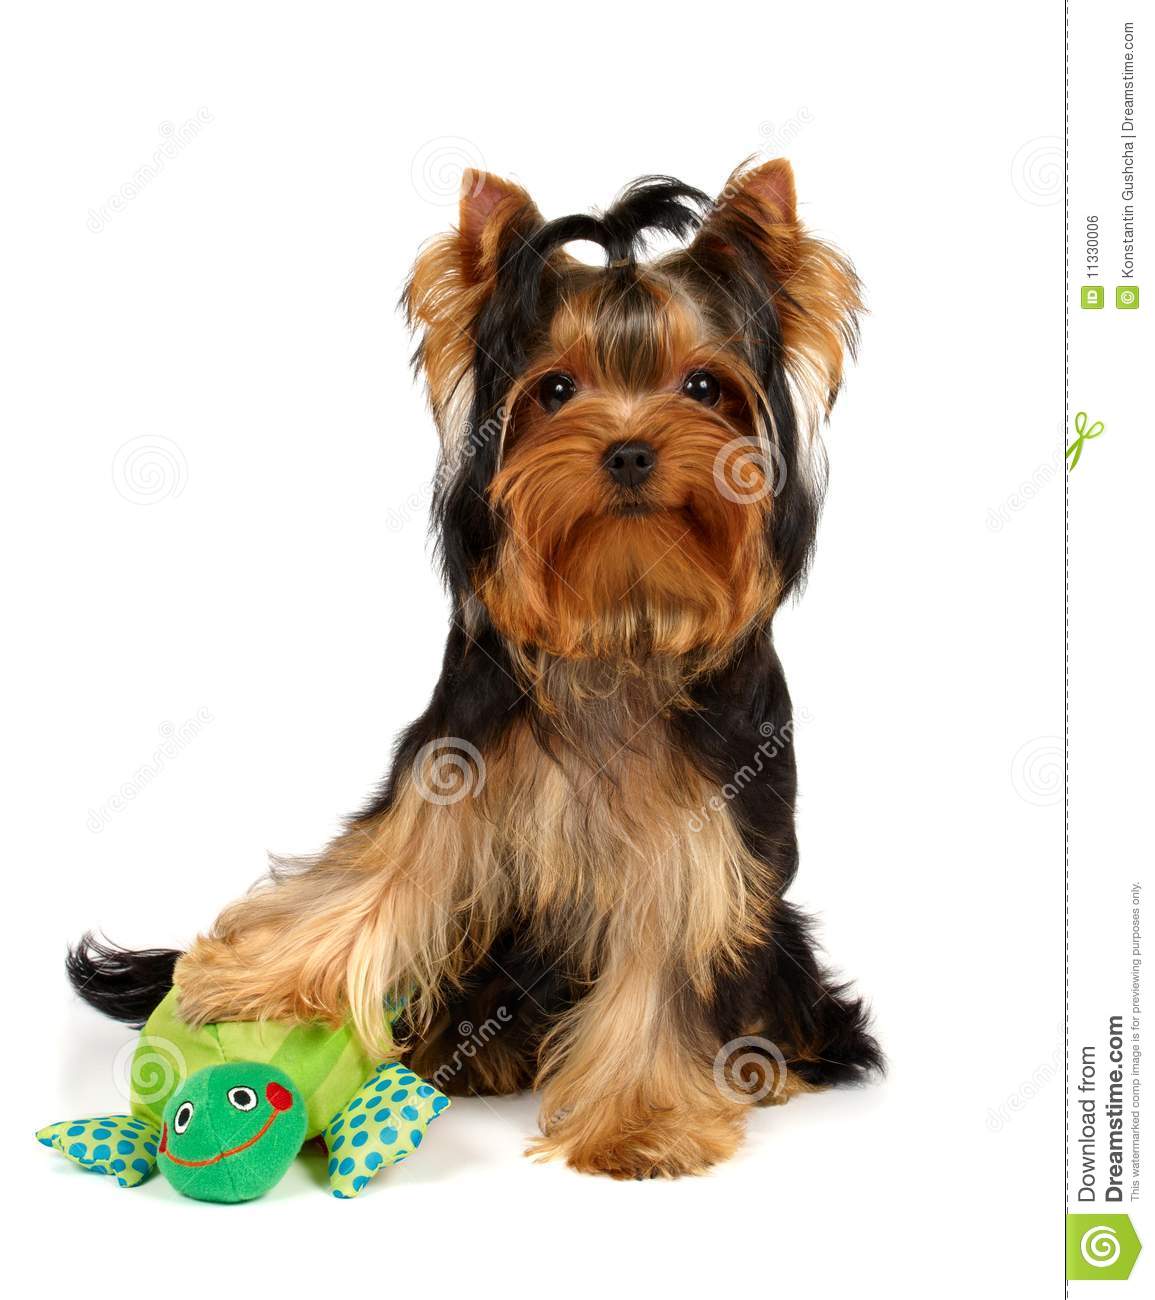     With A Smiling Turtle Toy Royalty Free Stock Image   Image  11330006